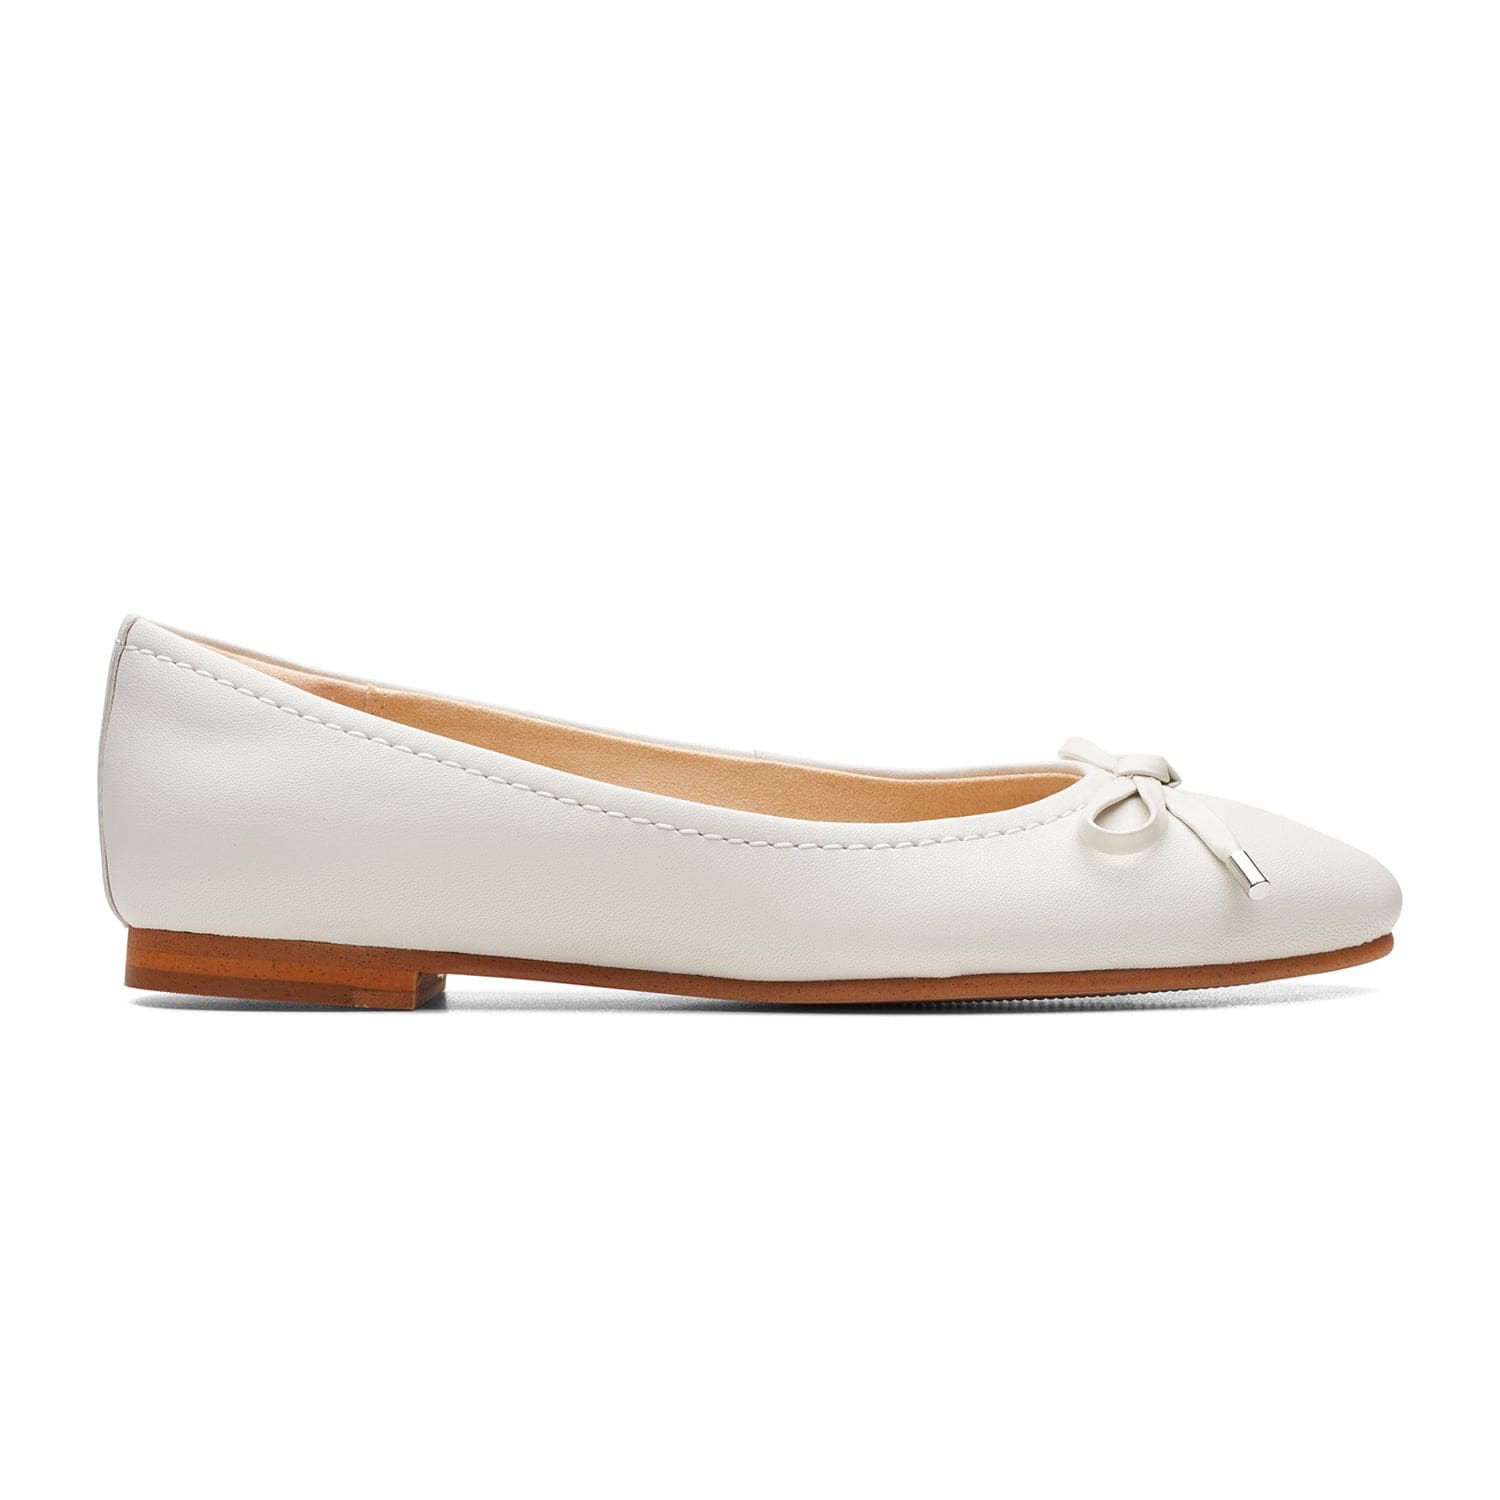 Clarks Grace Lily Shoes - White Leather - 261668154 - D Width (Standar ...